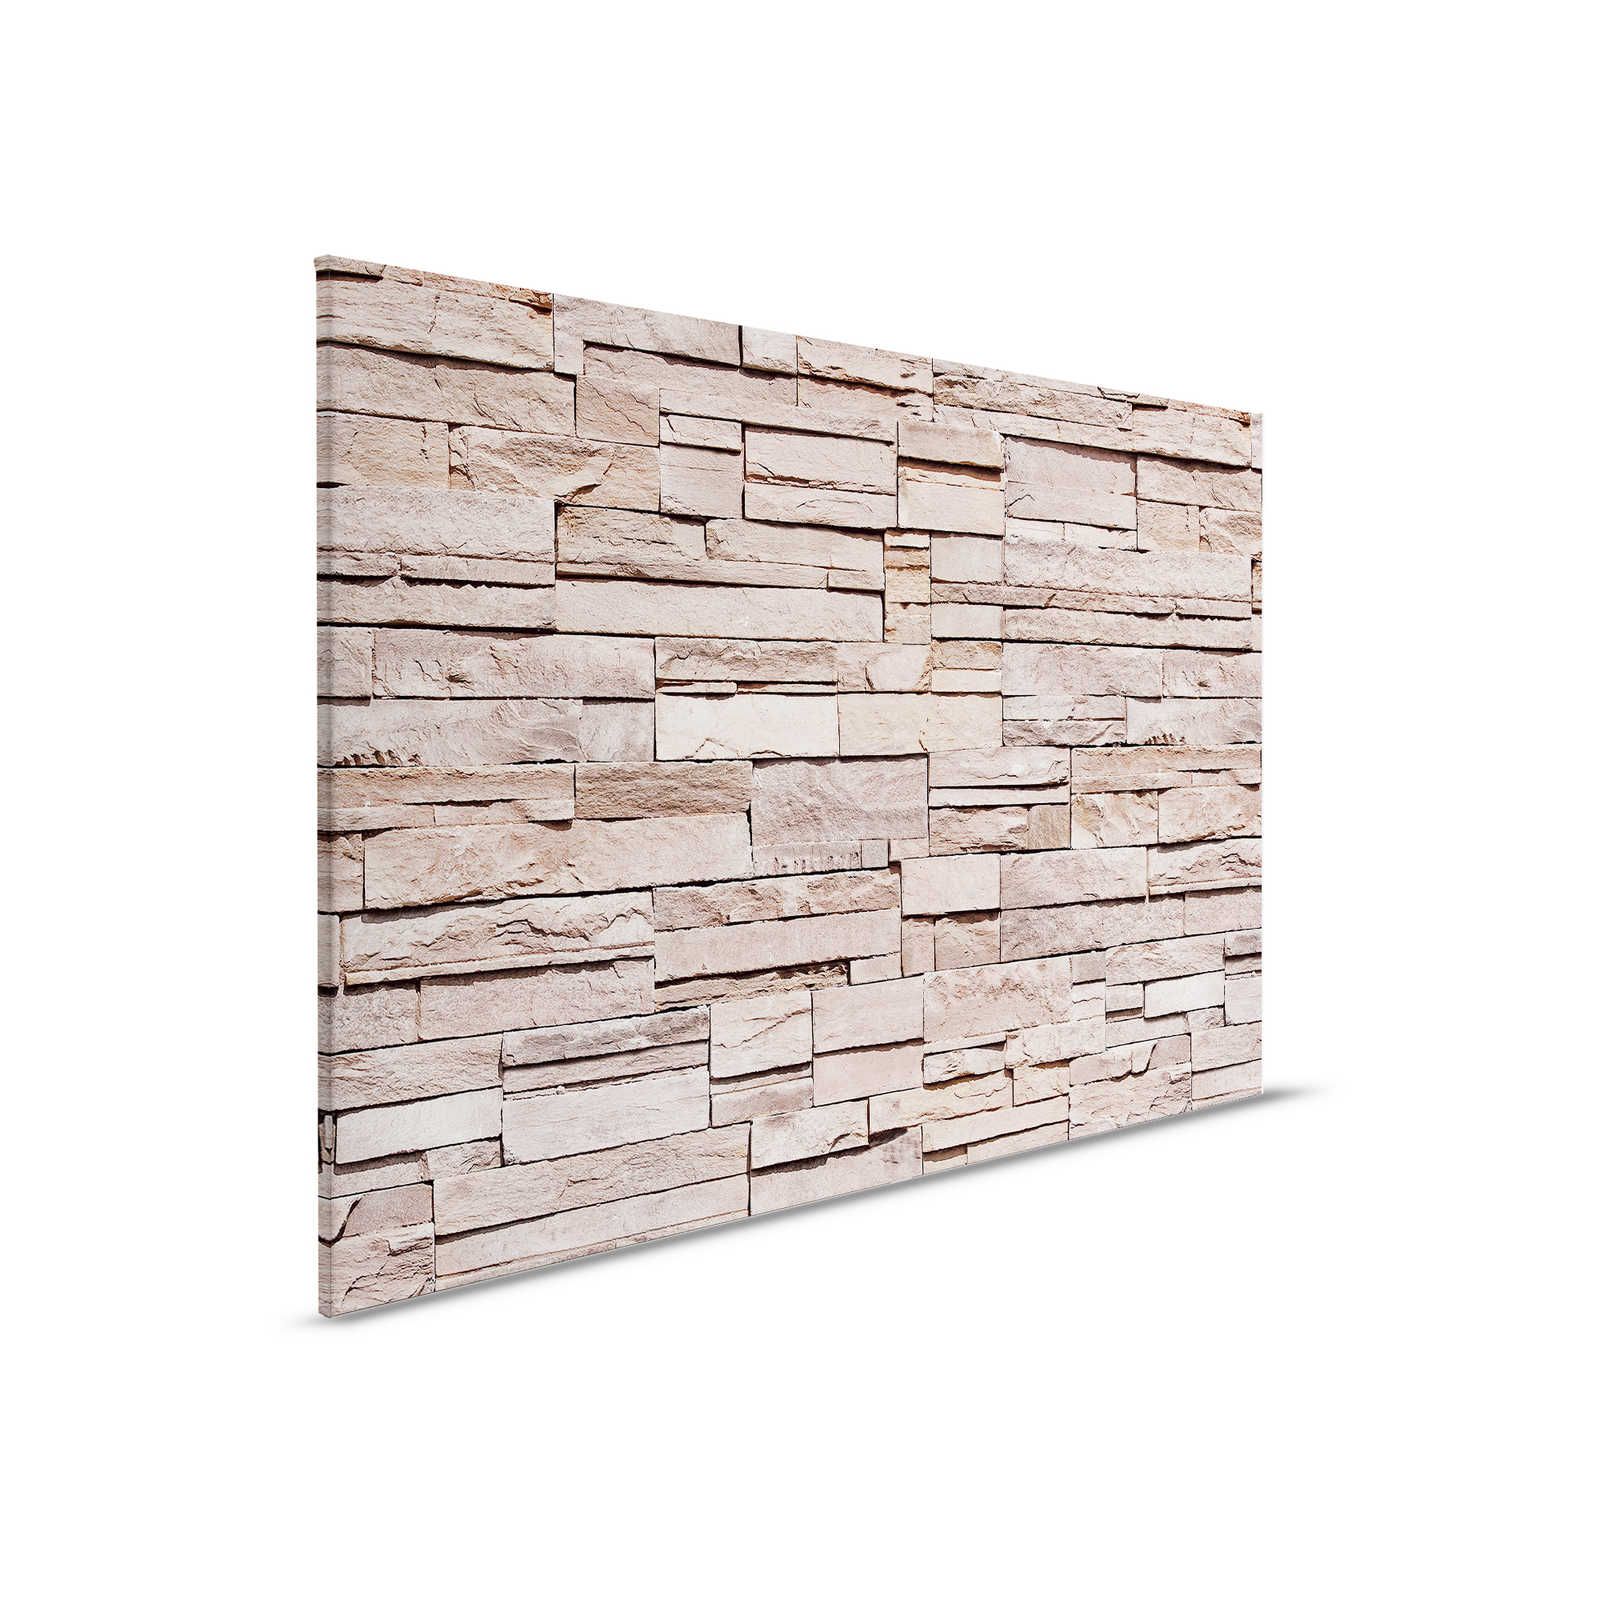         Canvas painting 3D stone look, light brown dry stone wall - 0.90 m x 0.60 m
    